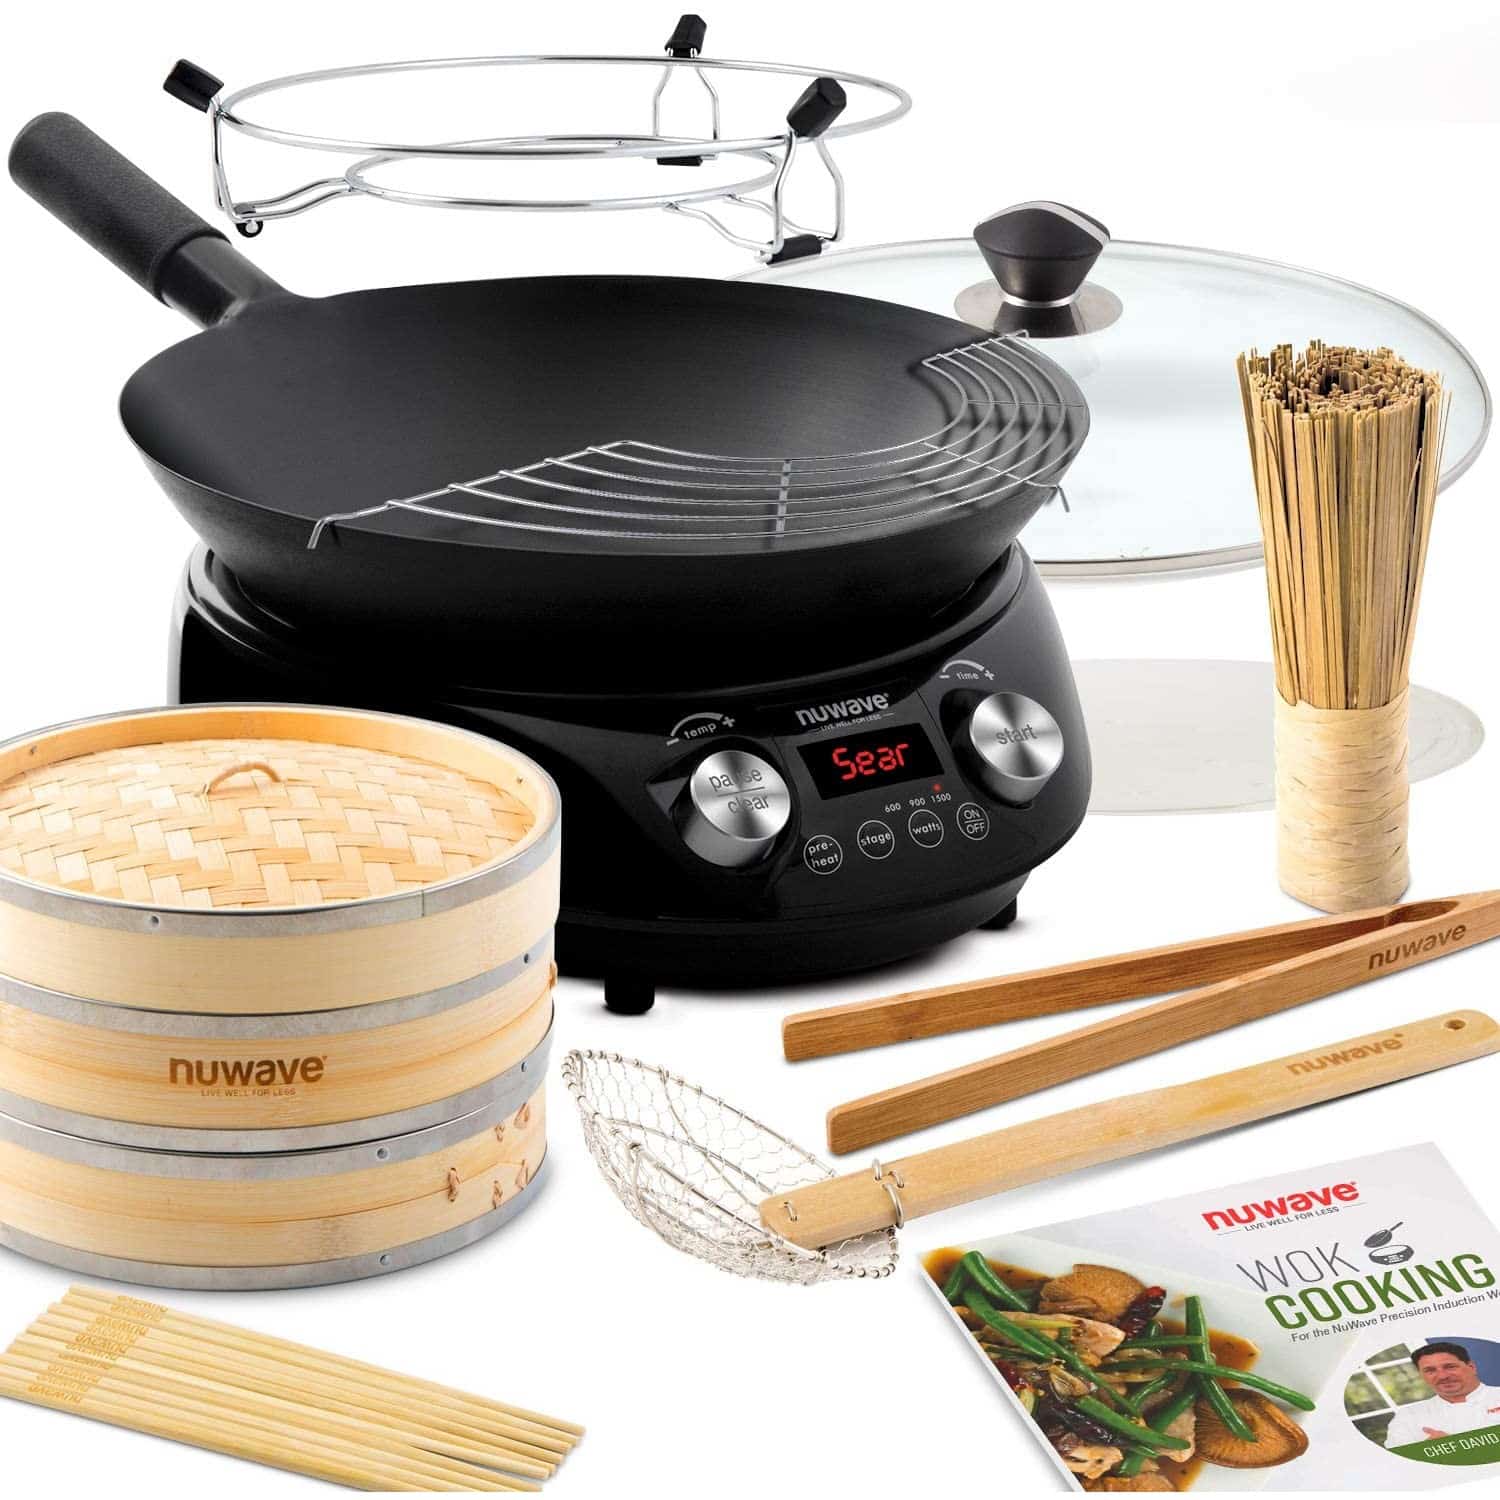 Top 10 Best Electric Woks in 2020 Reviews | Buying Guide What Is The Best Electric Wok To Buy